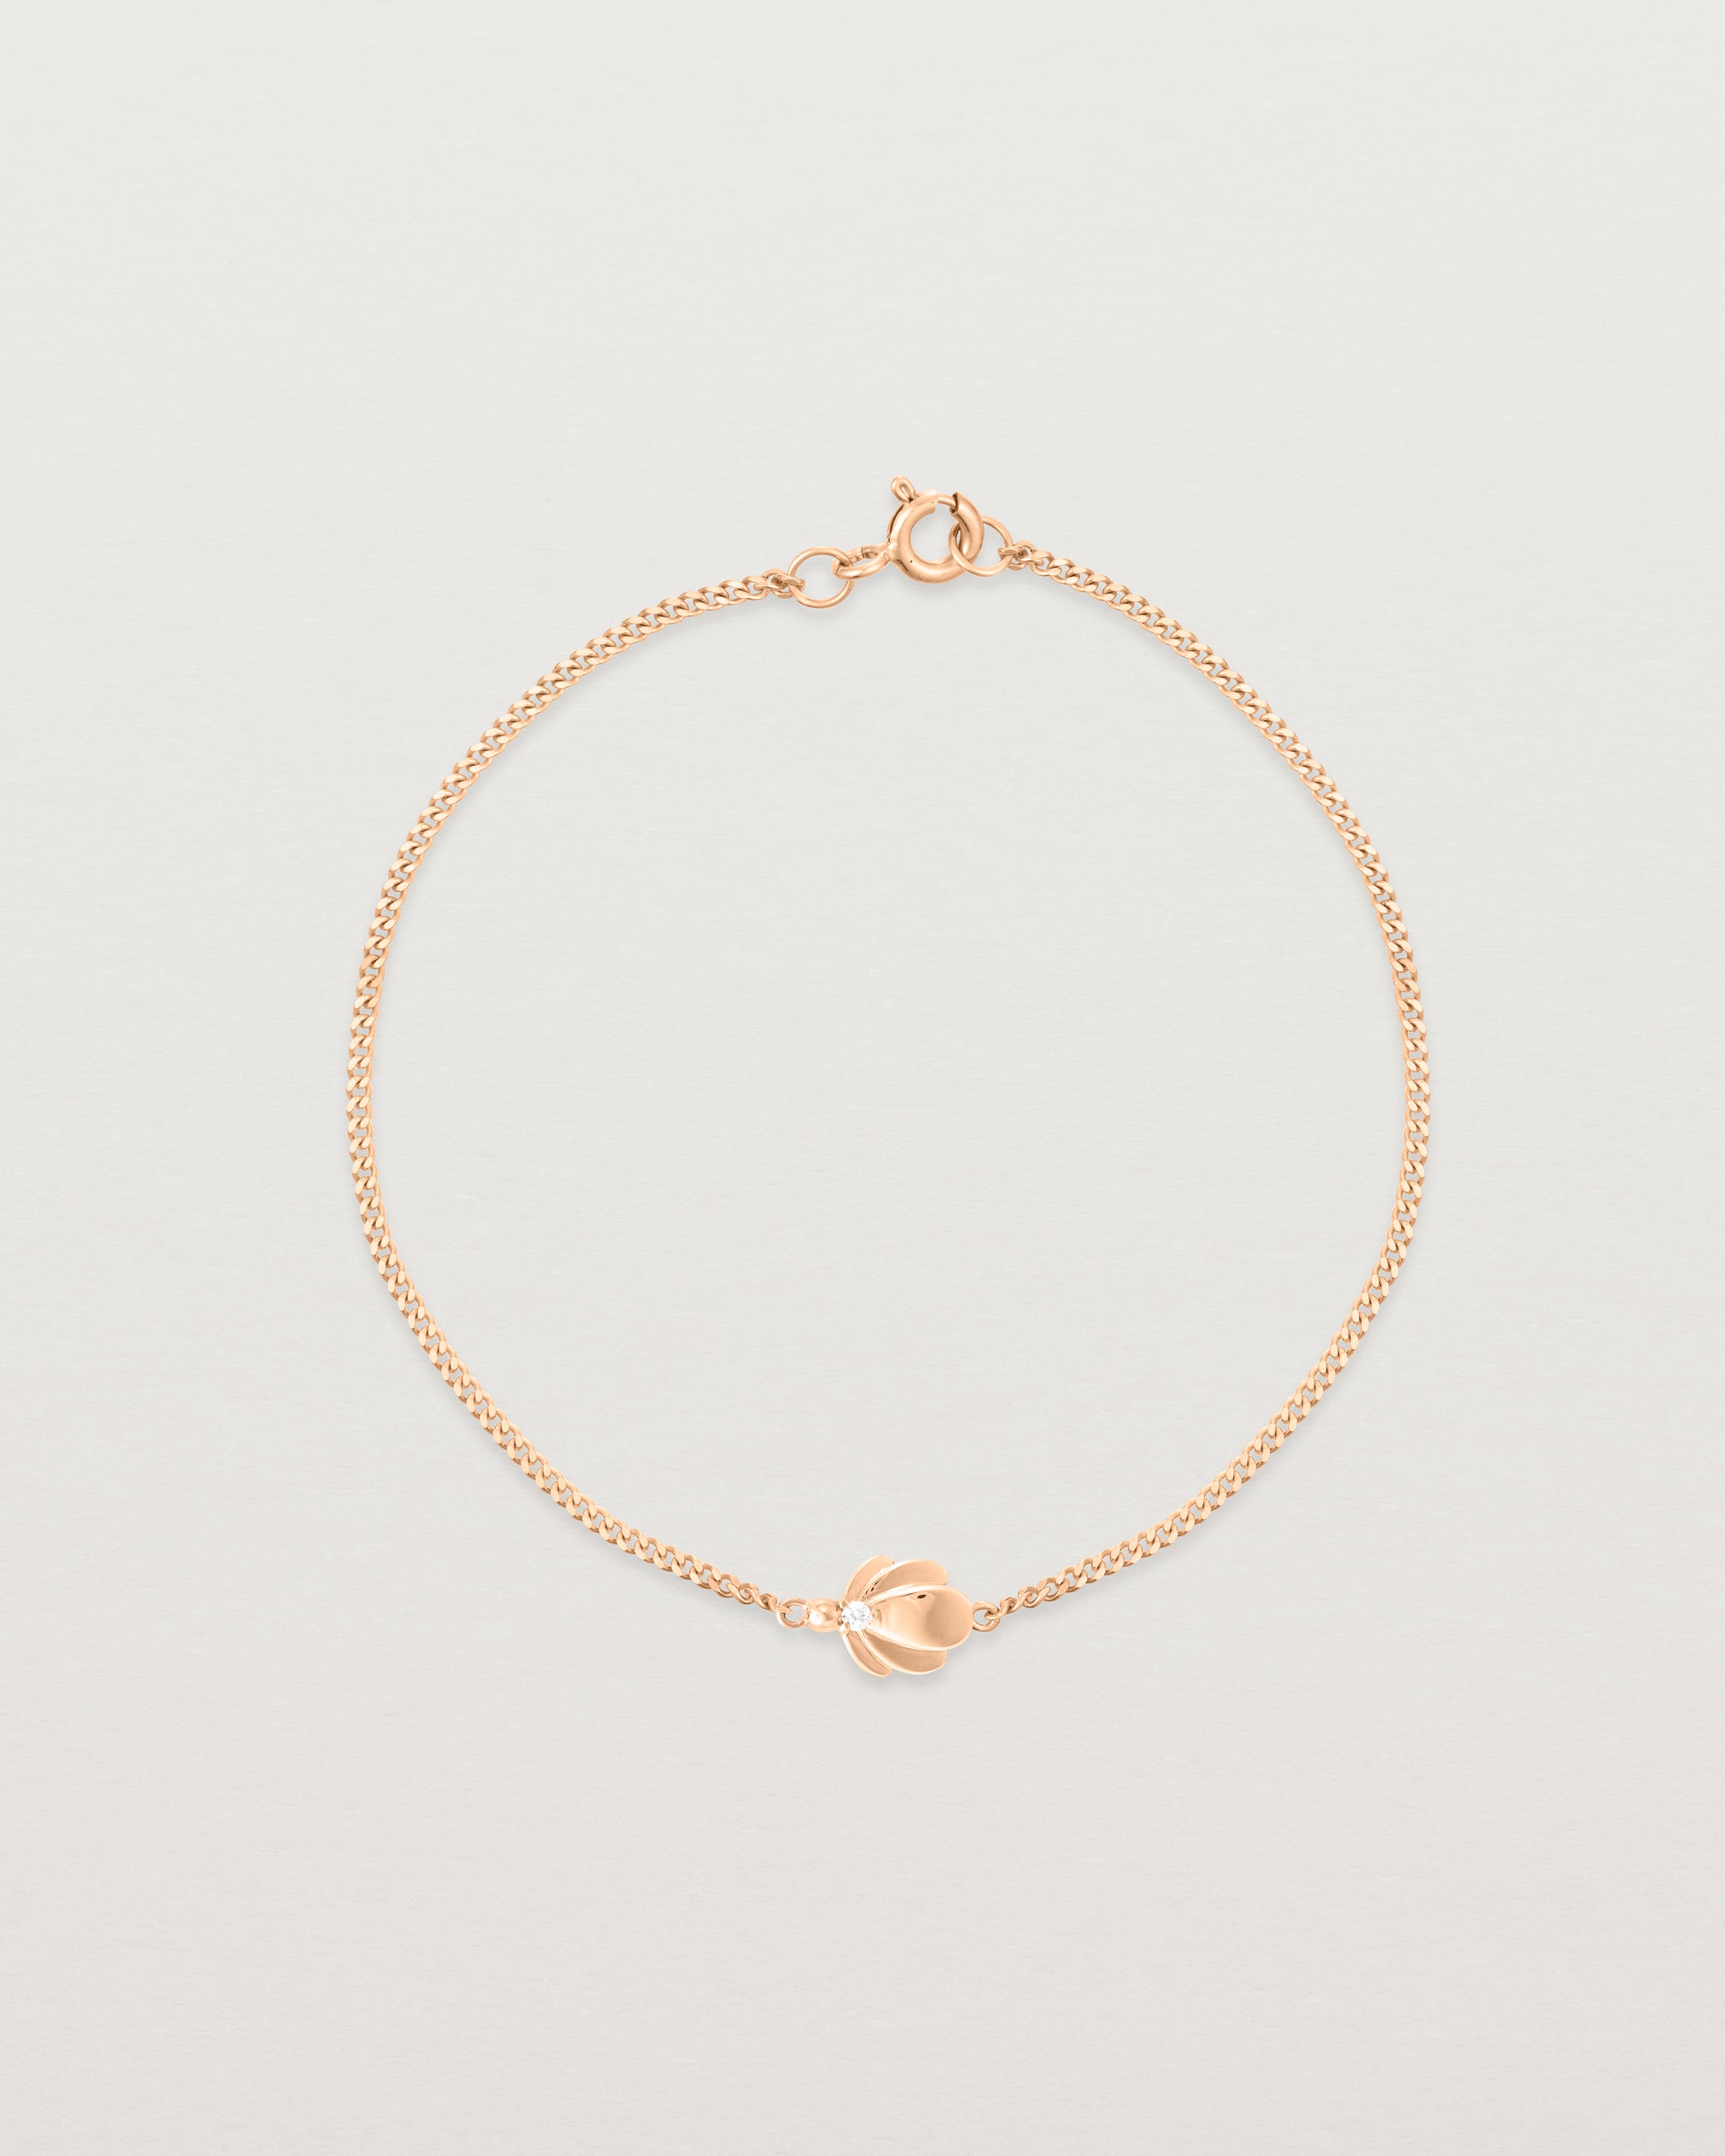 Top down view of the Aeris Bracelet | Diamond in Rose Gold.